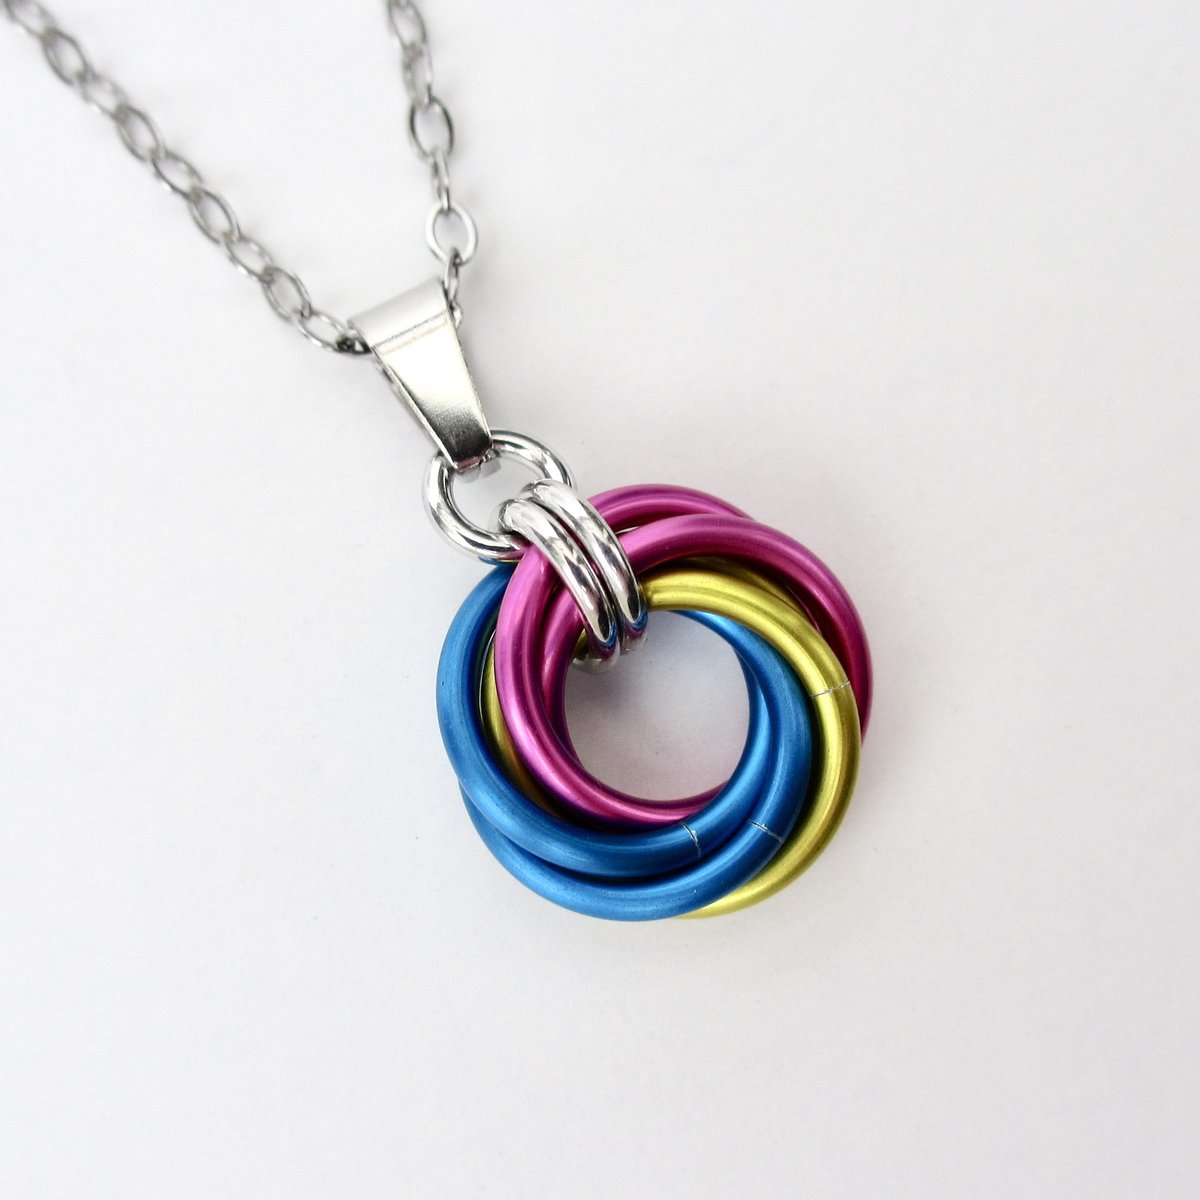 Pansexual pride pendant necklace, chainmail love knot, pan pride jewelry, pink yellow blue